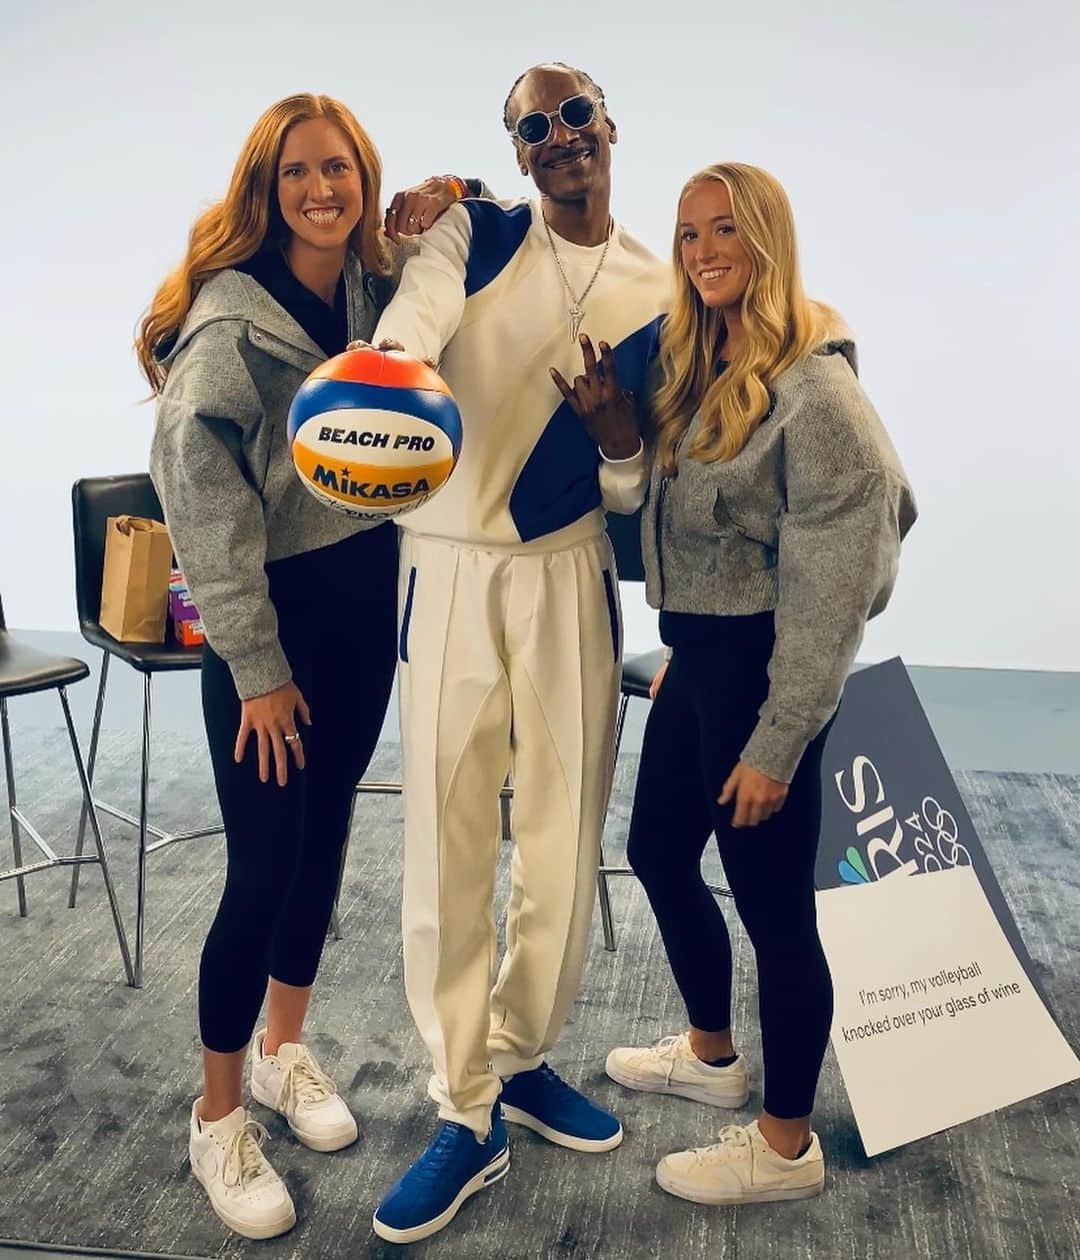 USA Volleyballのインスタグラム：「California Gurls (feat. Snoop Dogg)  Swipe for Snoop playing pepper. Yes, that’s a real sentence.   #TeamUSA #roadtoparis2024 #snoopdogg @teamusa @nbcolympics @nbcsports」